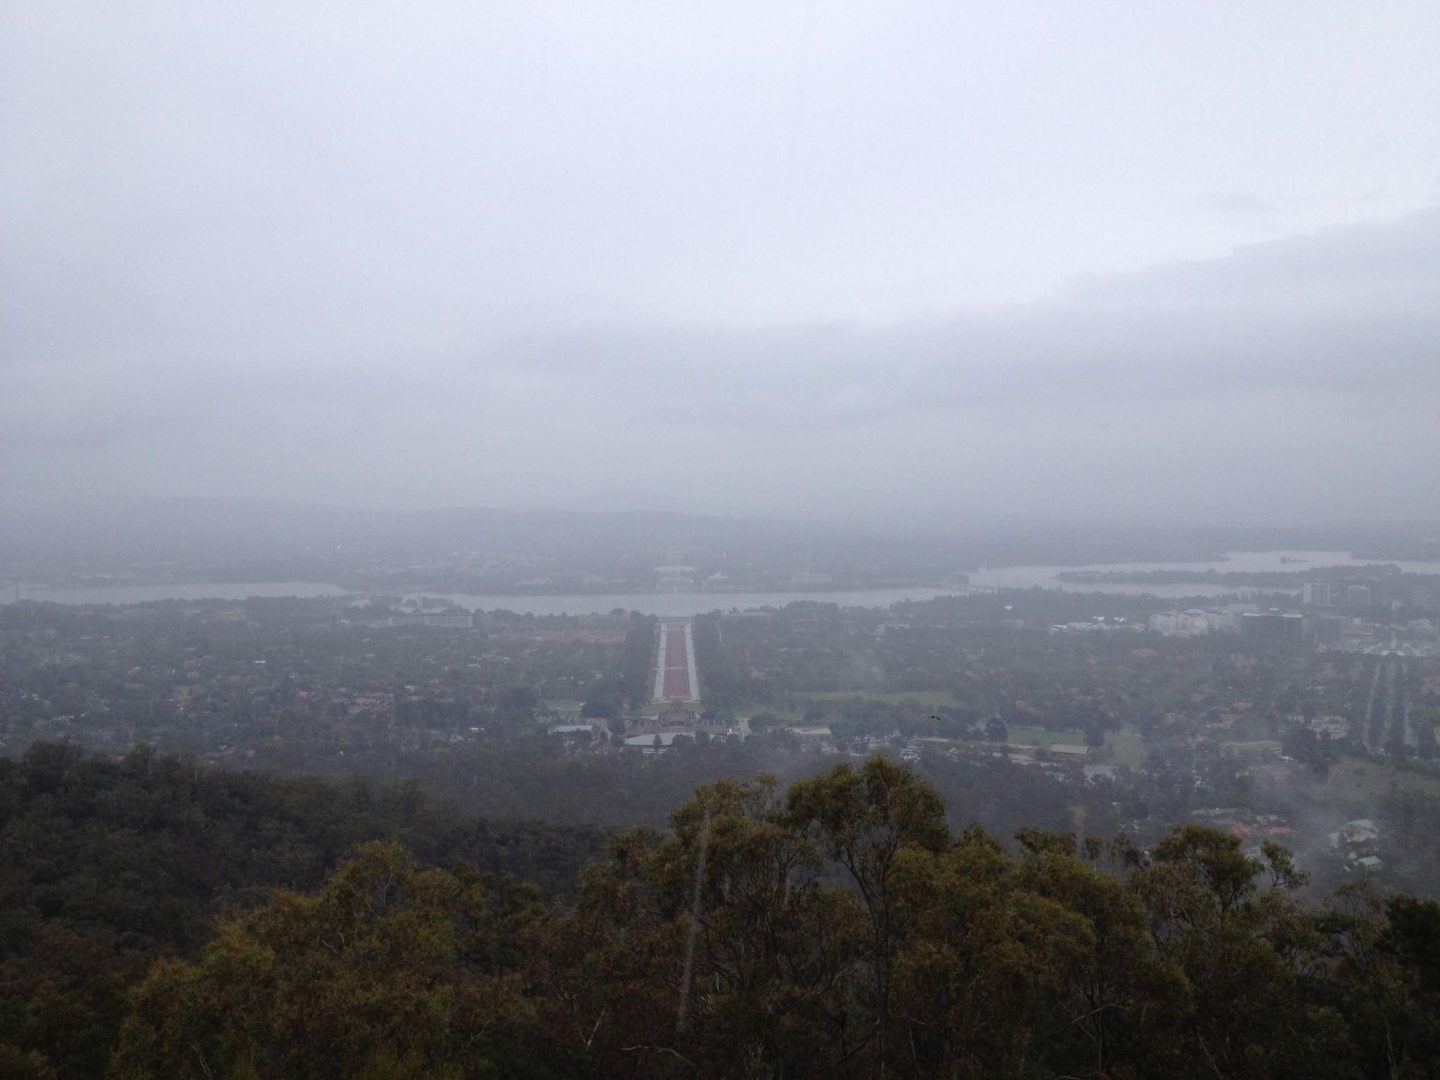 Views from Mount Ainslie, Canberra